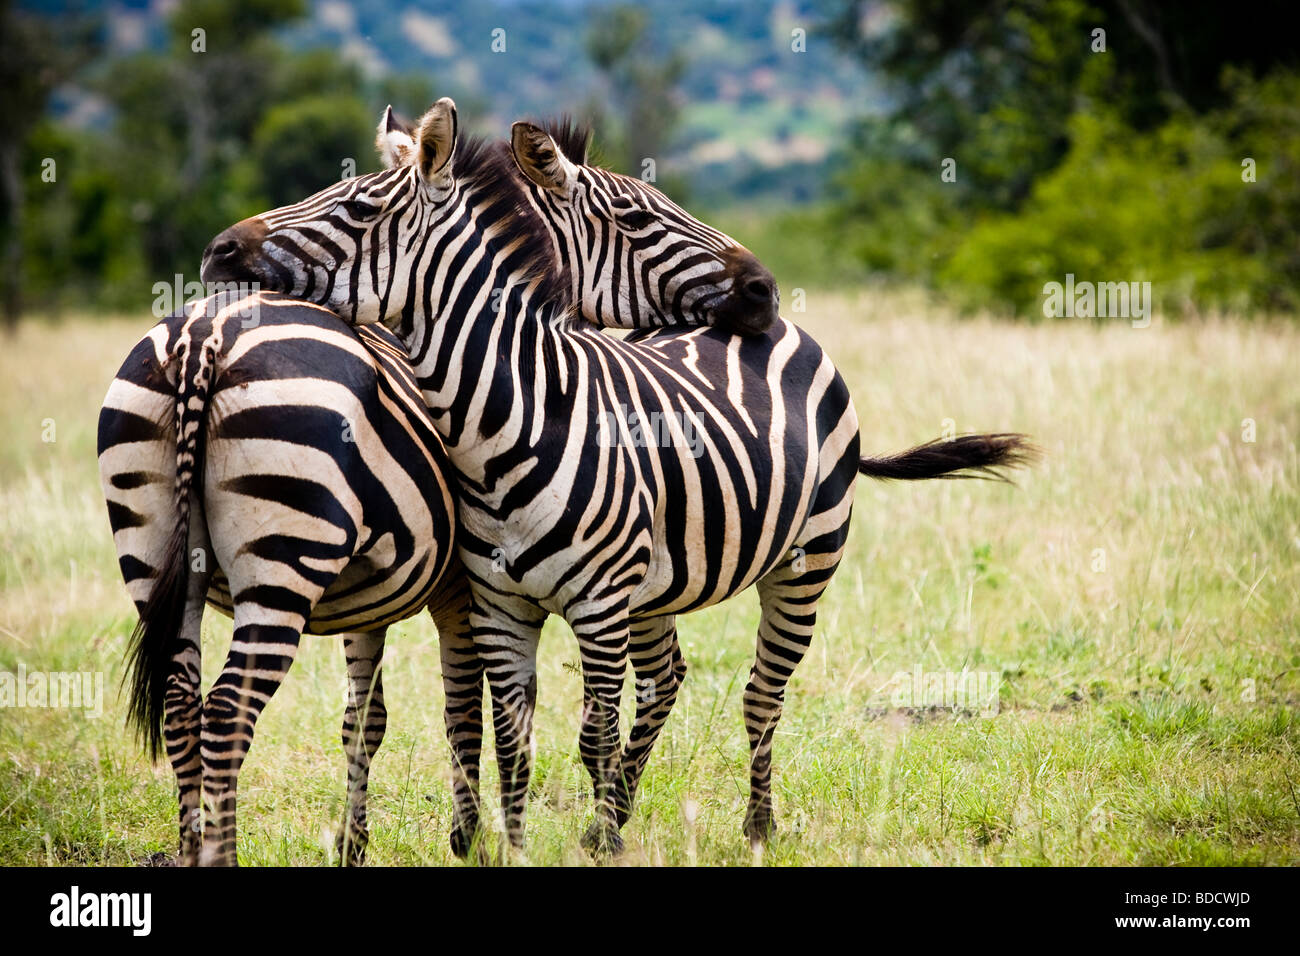 Two zebras in Africa wild resting with one another in their natural habitat Stock Photo